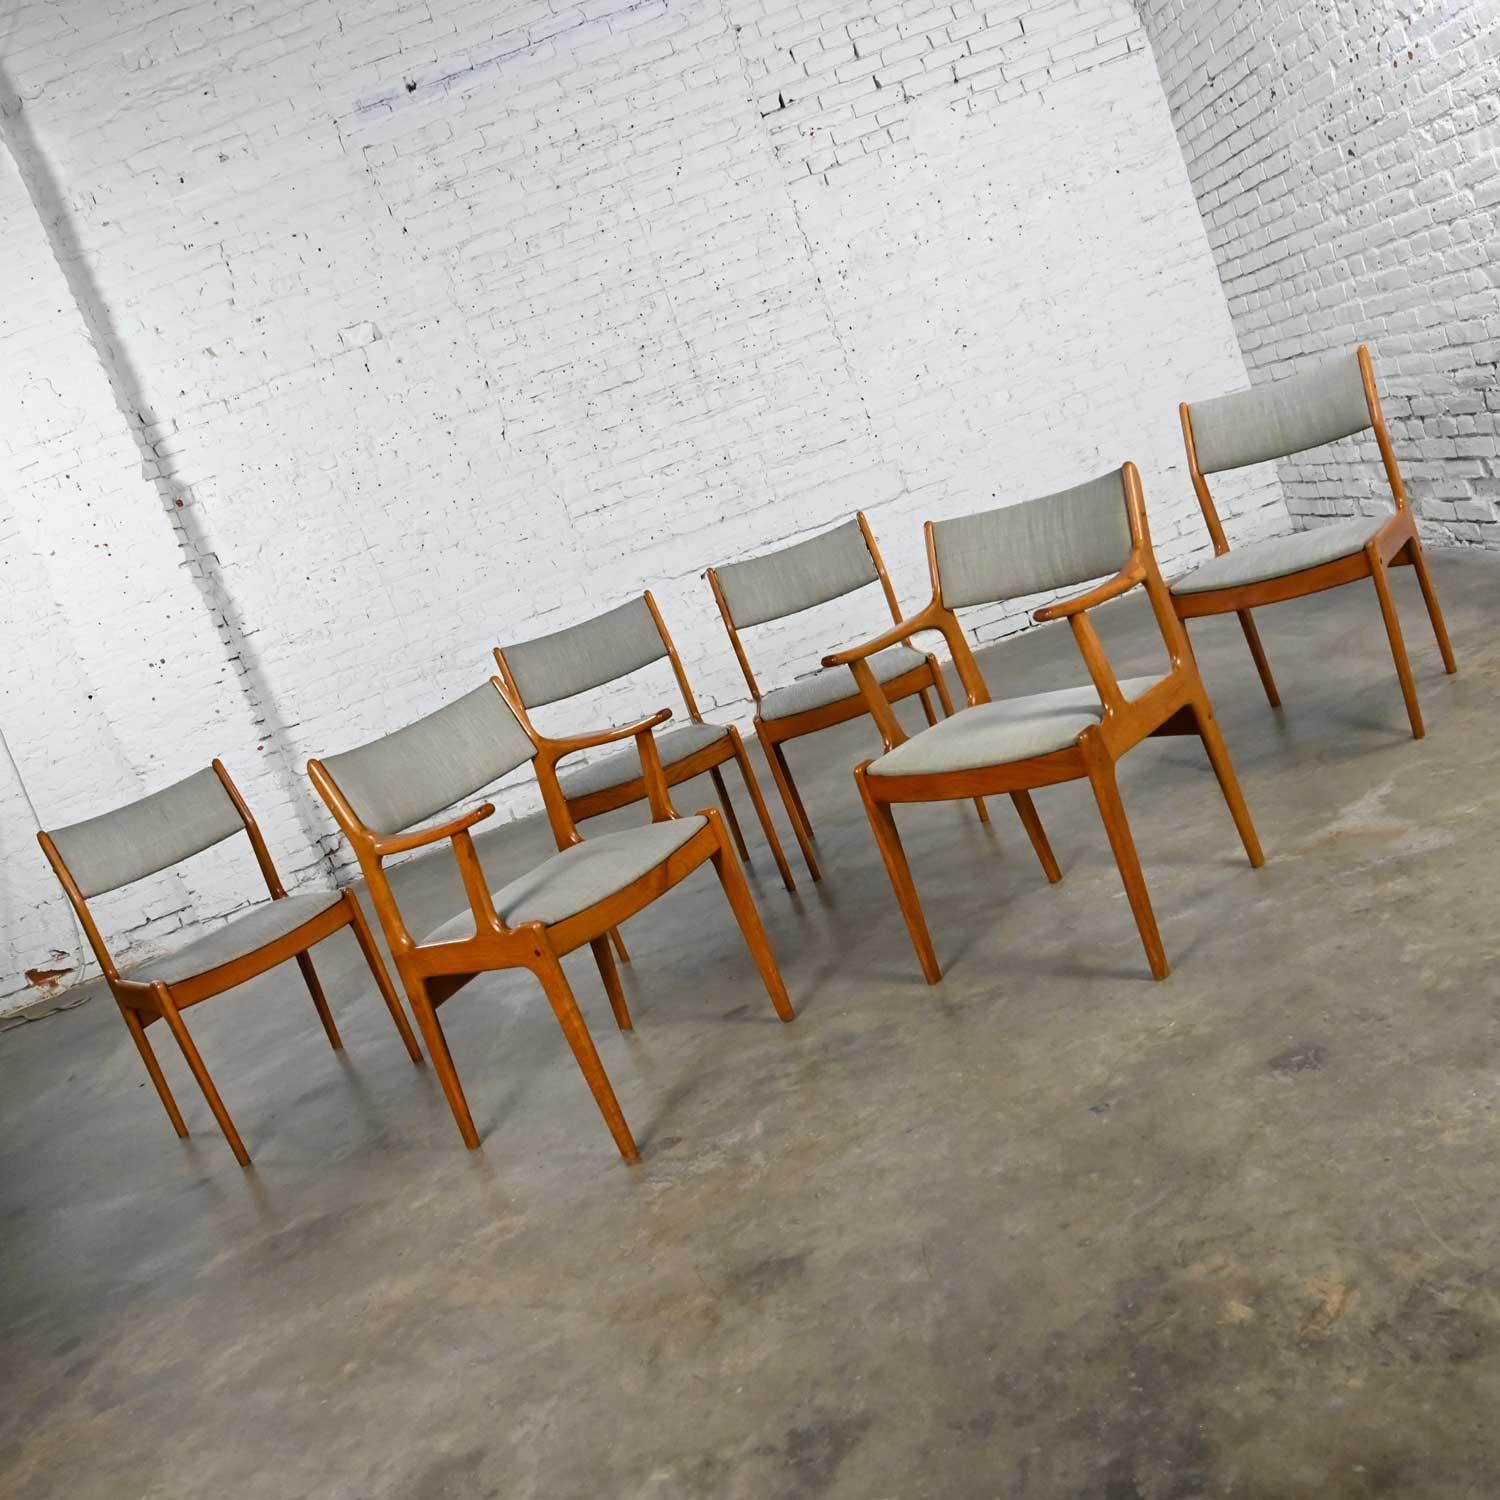 Vintage Scandinavian Modern Teak & Grey Fabric Dining Chairs 2 Arm 4 Side Set 6 In Good Condition For Sale In Topeka, KS